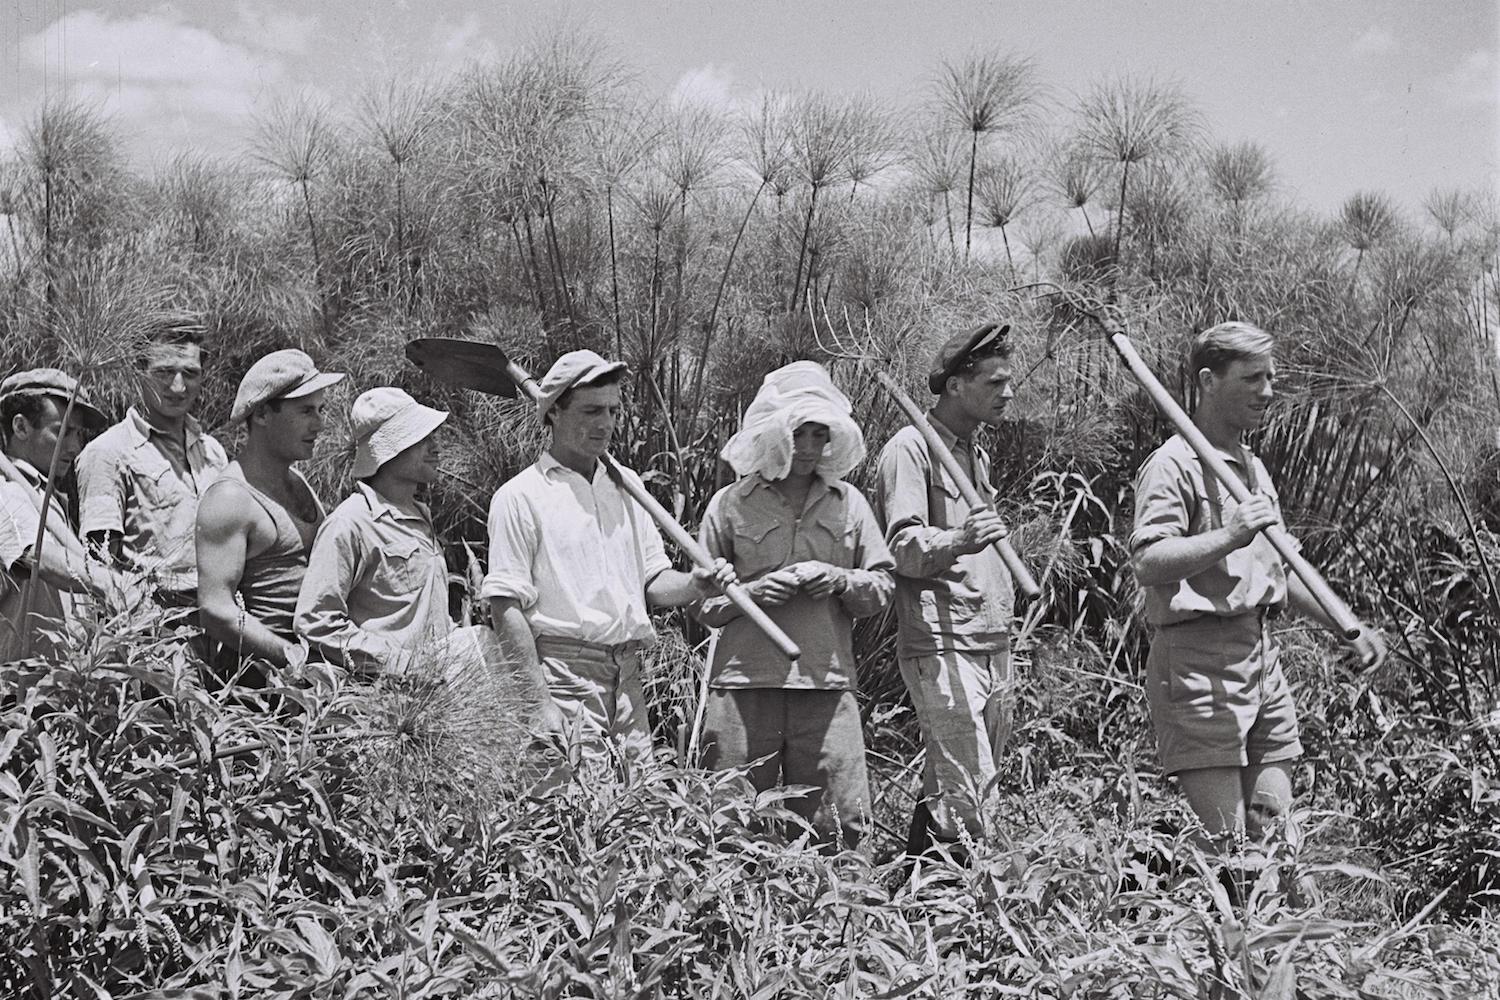 Members of Kibbutz Amir working in the Papyrus thicket of the Hula Swamps, June 30, 1940. (Kluger Zoltan/GPO)